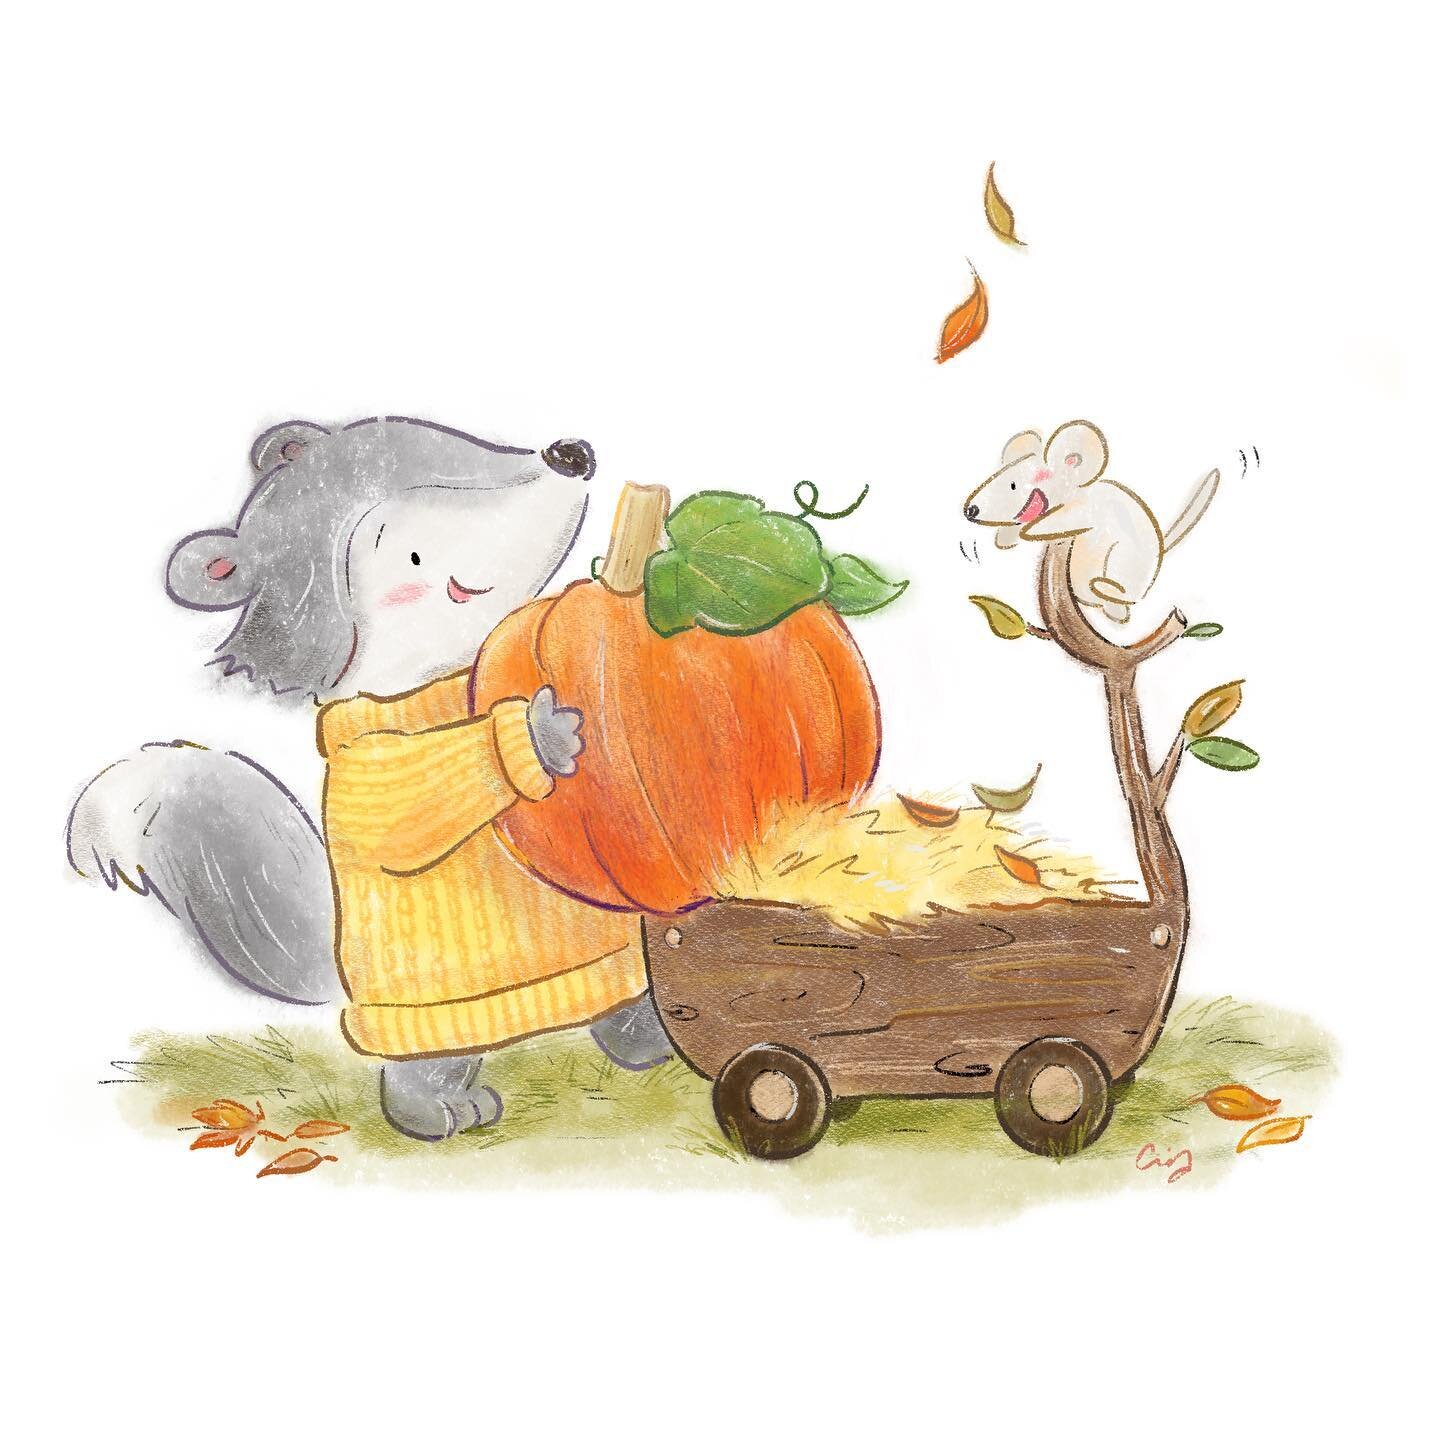 It&rsquo;s FALL! 🍁(and more importantly sweater season yay 💛) I haven&rsquo;t really done personal fun pieces in a while, so it feels nice to get back to it - obviously had to draw some cute animals and pumpkins 😊🎃

#kidlitart #childrensbookillus